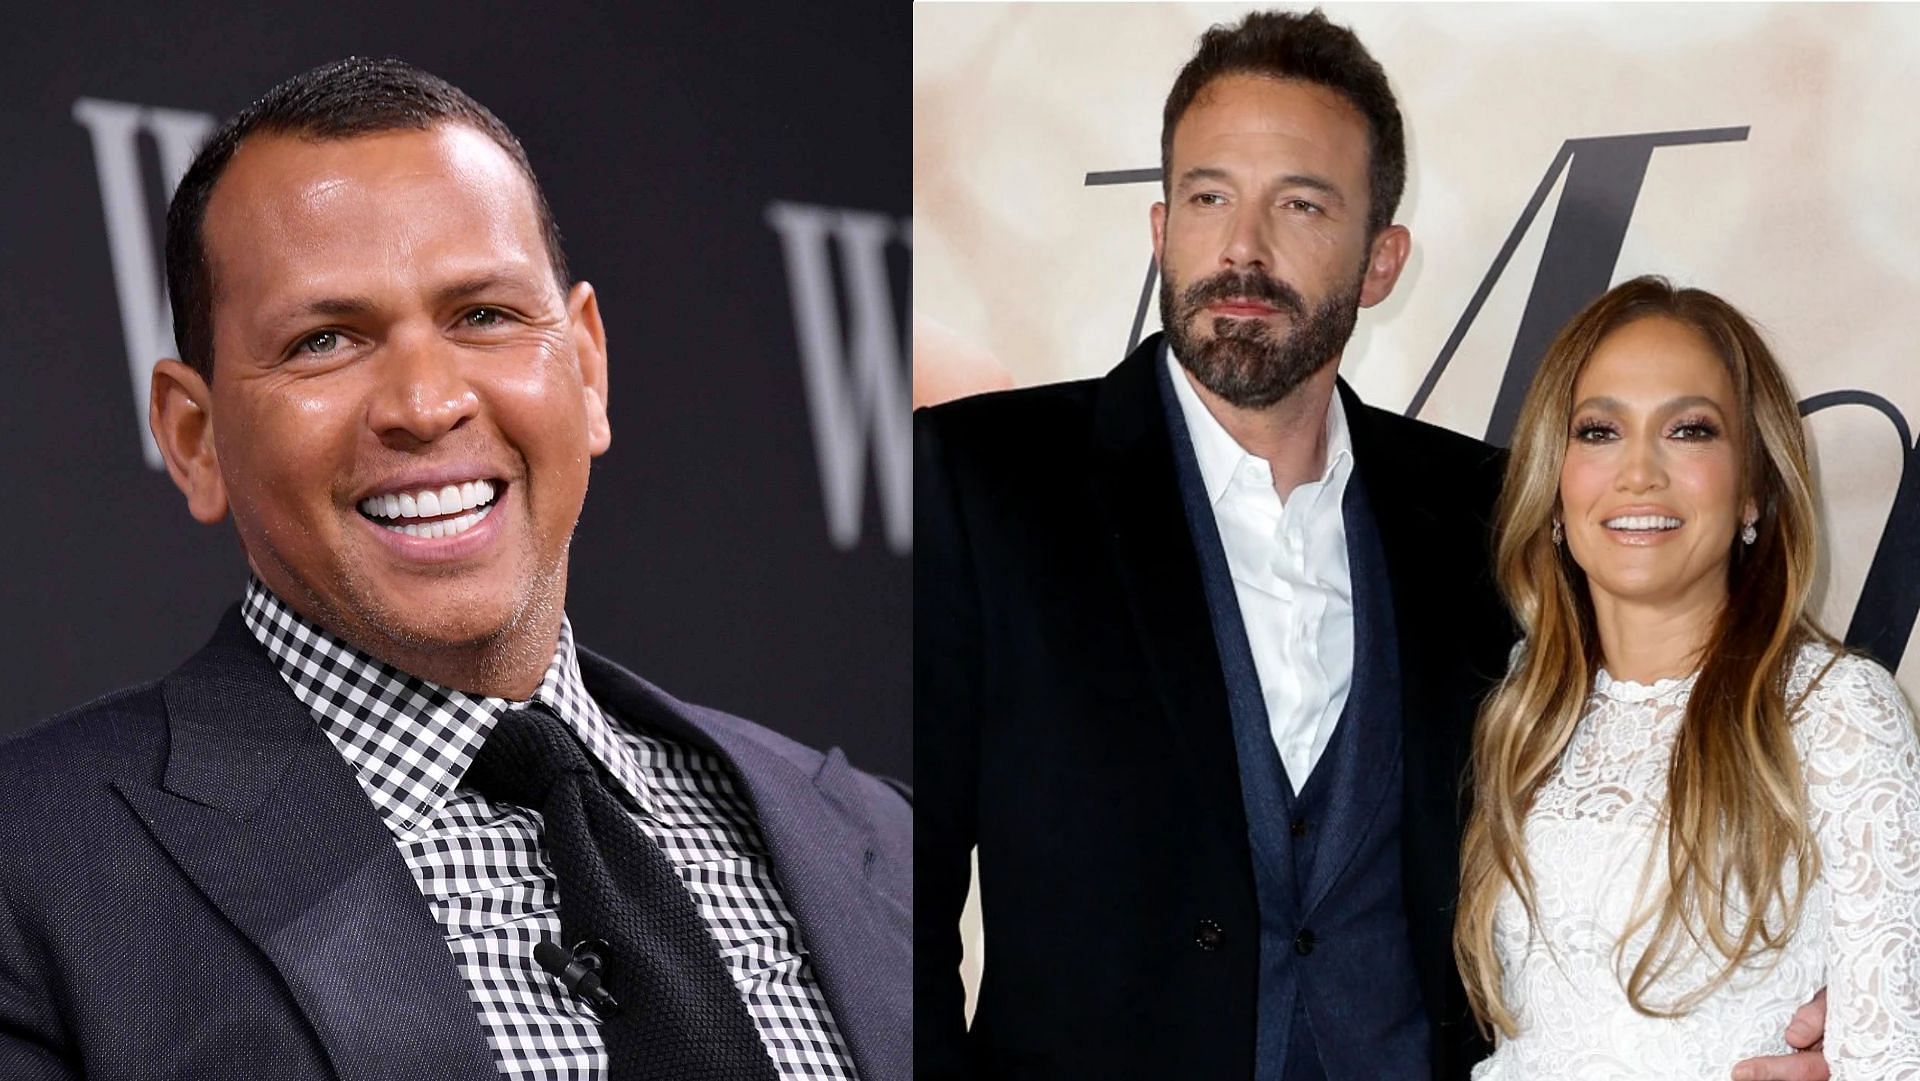 Jennifer Lopez and Alex Rodriguez were engaged for four years. (Image via Michael Loccisano/Getty, Frazer Harrison/Getty)